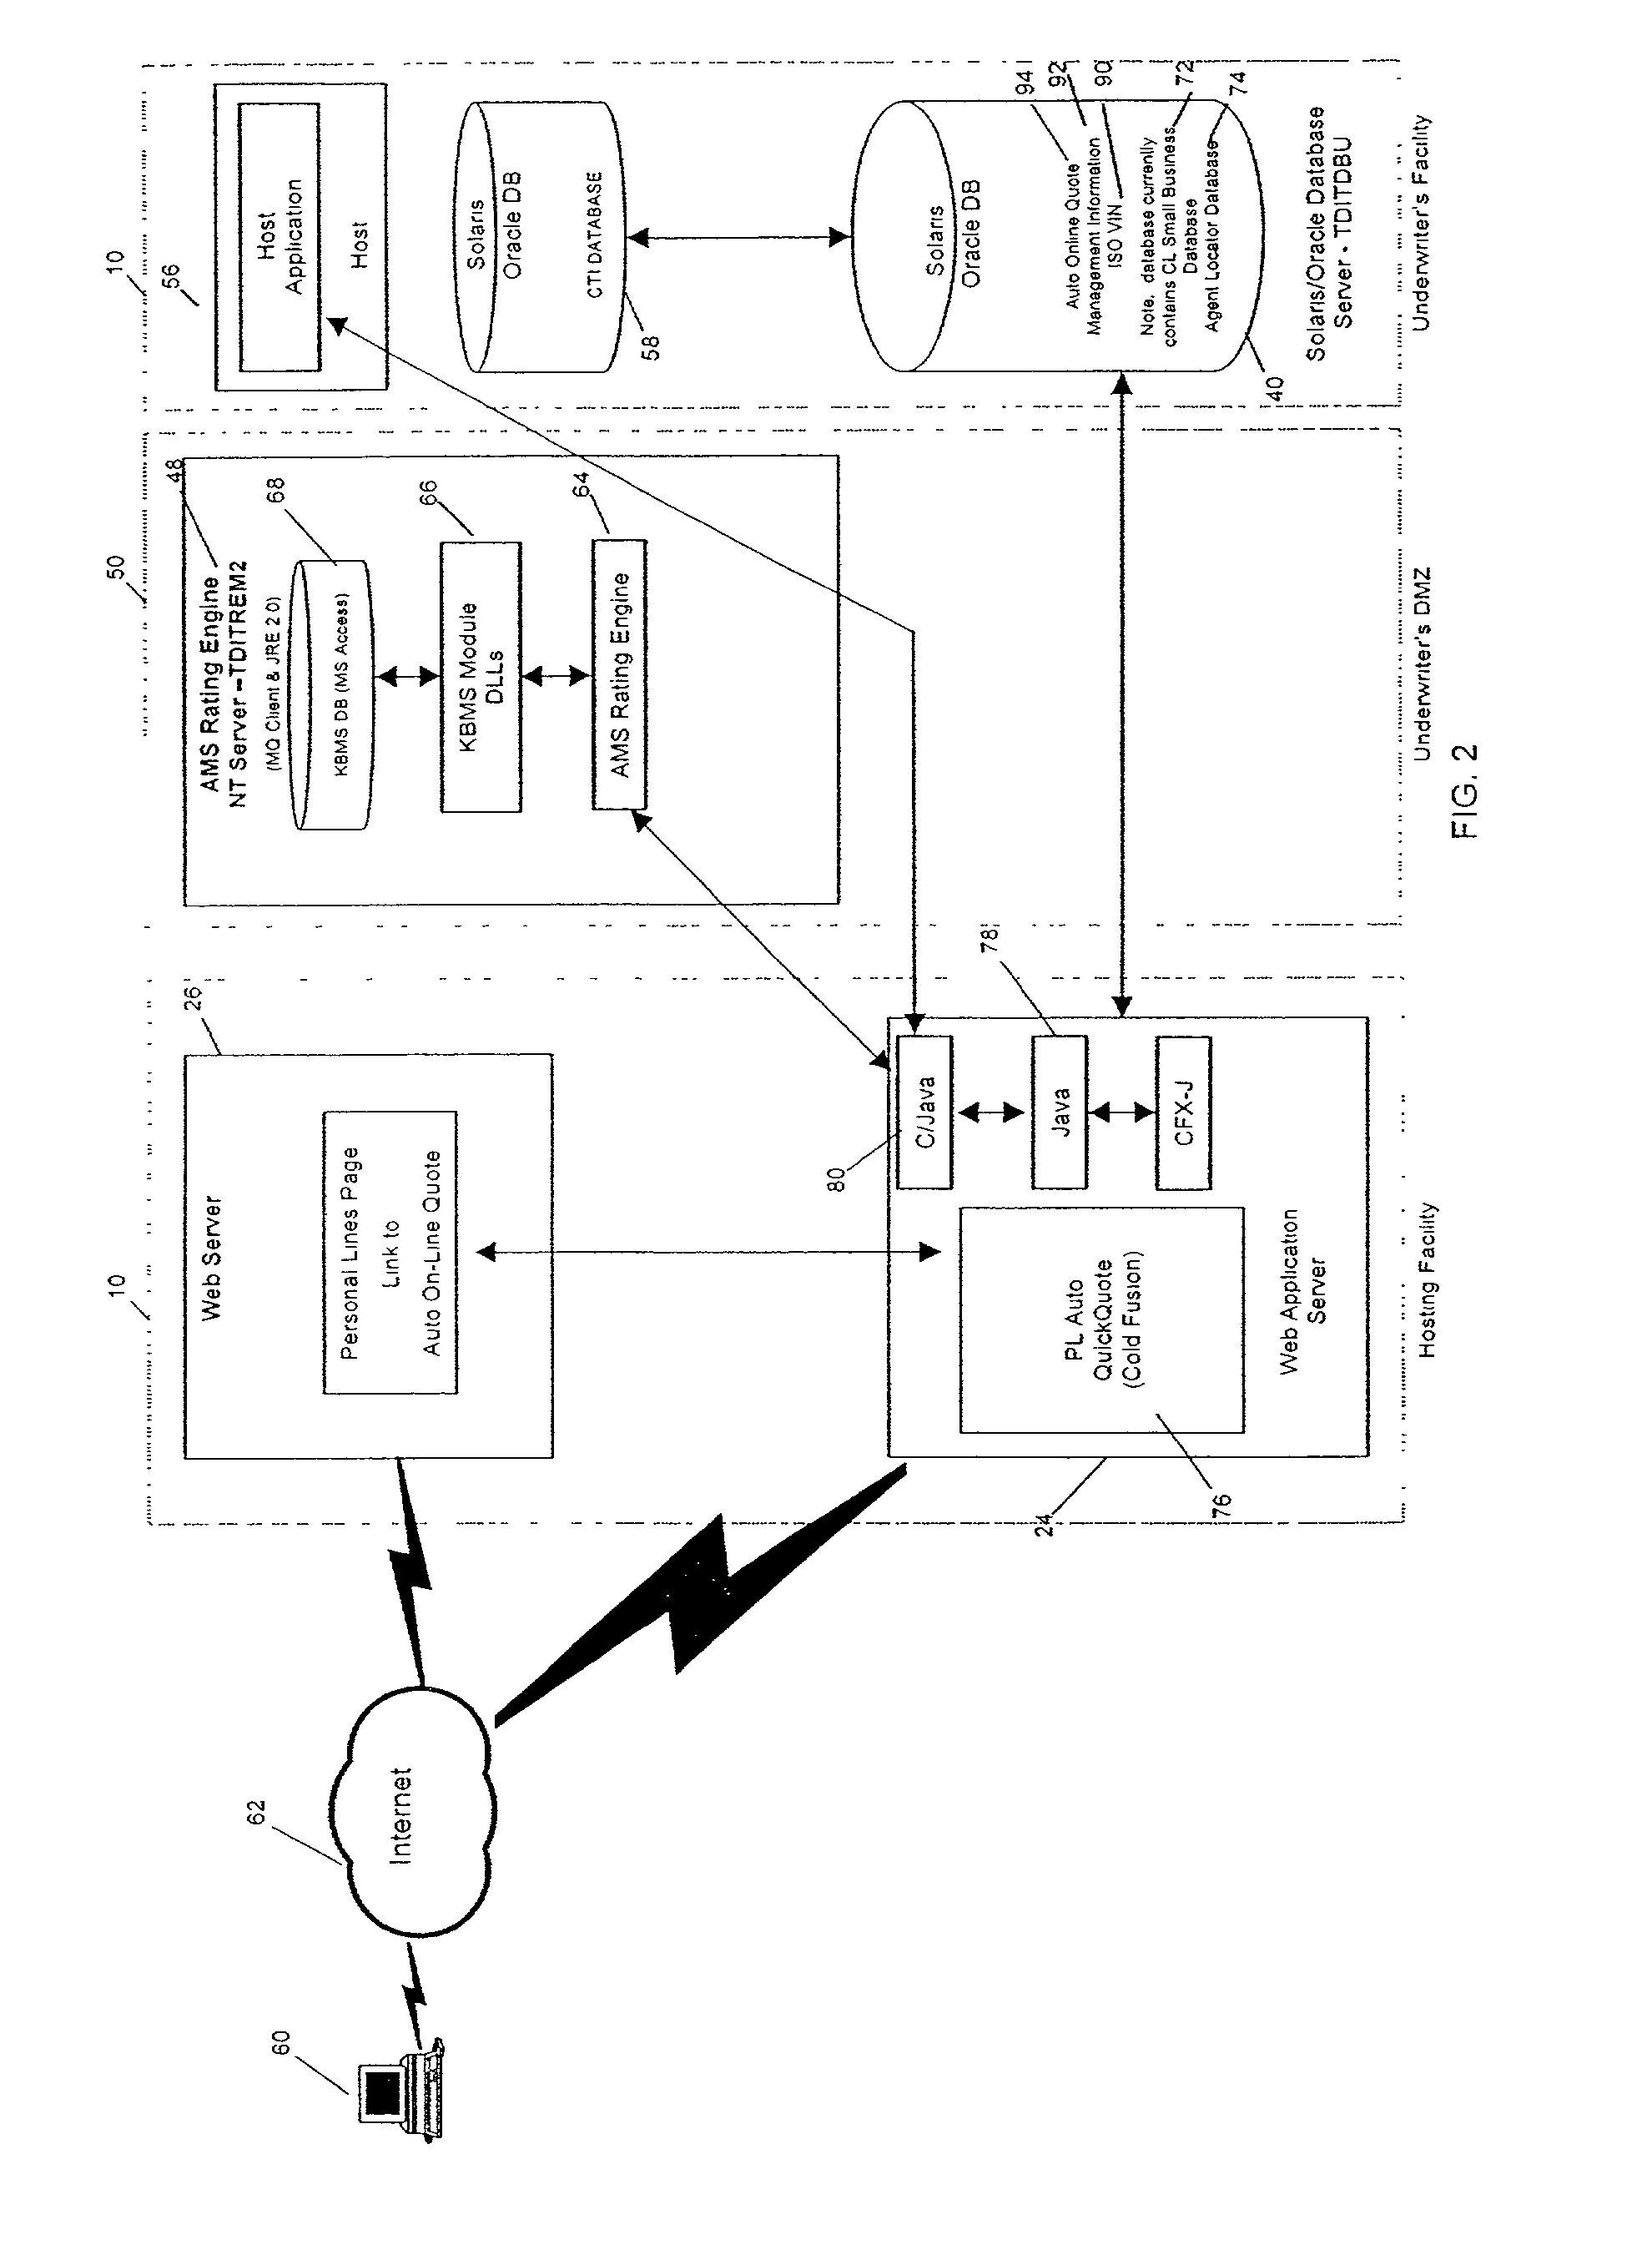 Method and system for furnishing an on-line quote for an insurance product